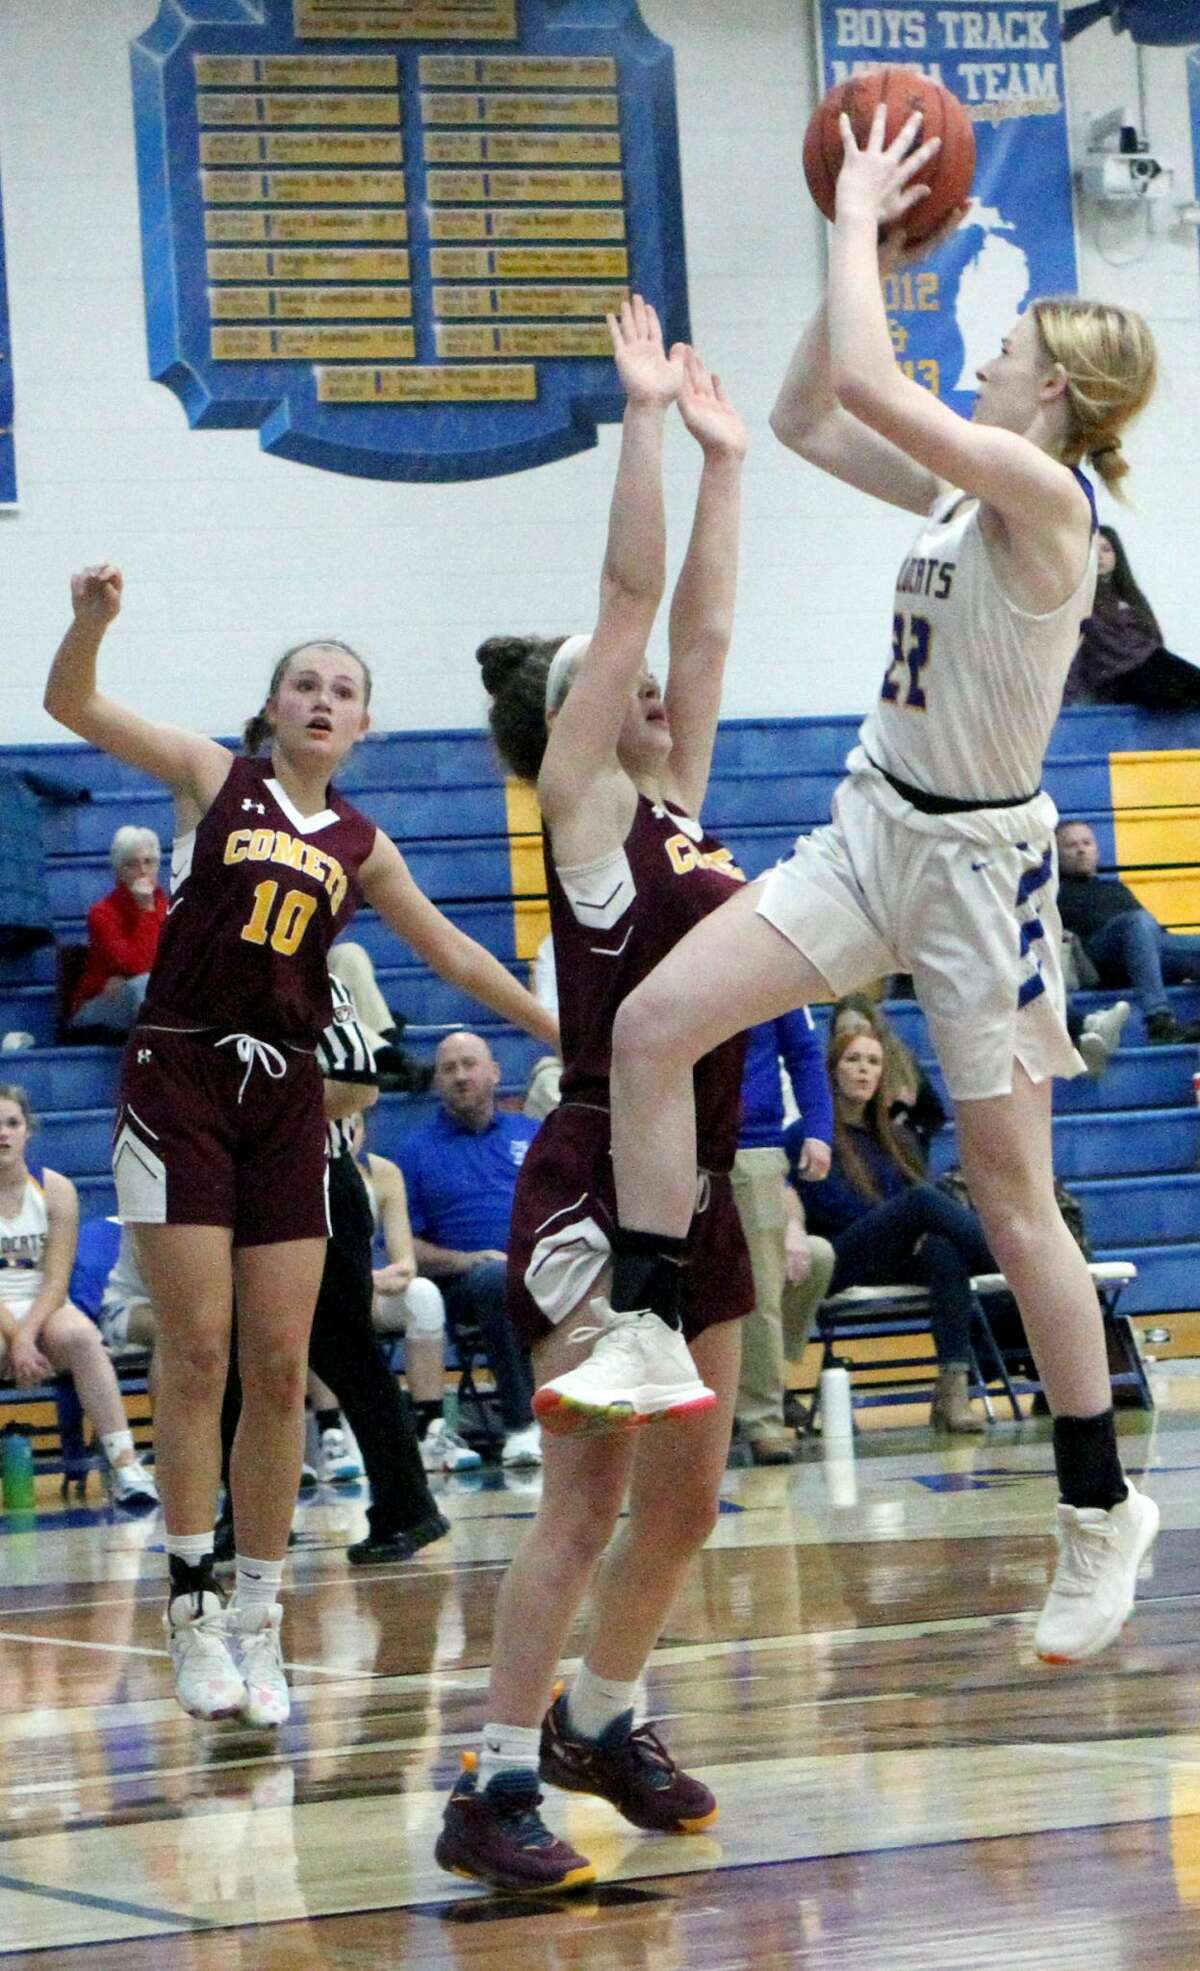 The Evart girls basketball team was dealt a 50-33 loss at the hands of McBain NMC Christian on Thursday evening. Junior Addy Gray paced the Wildcats with 14 points. 